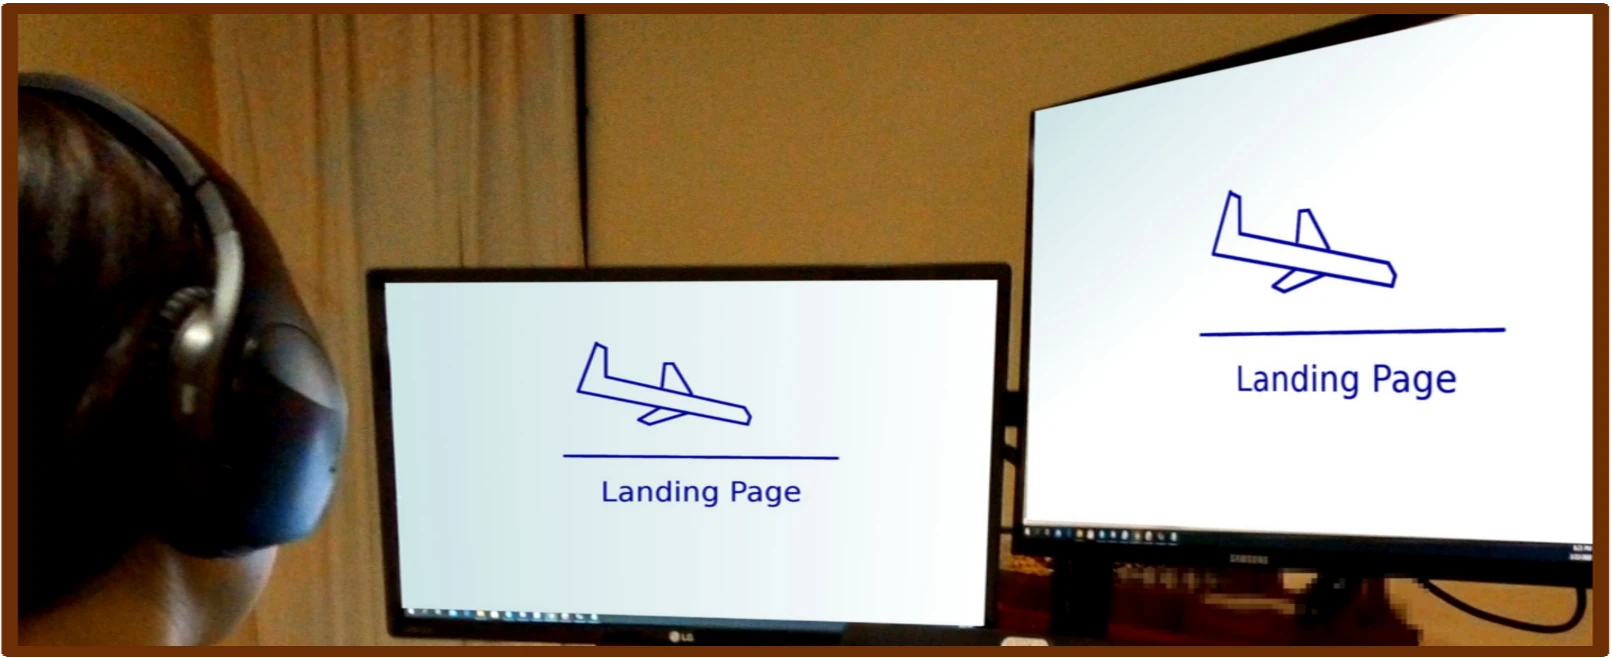 Two landing pages displayed on two monitors